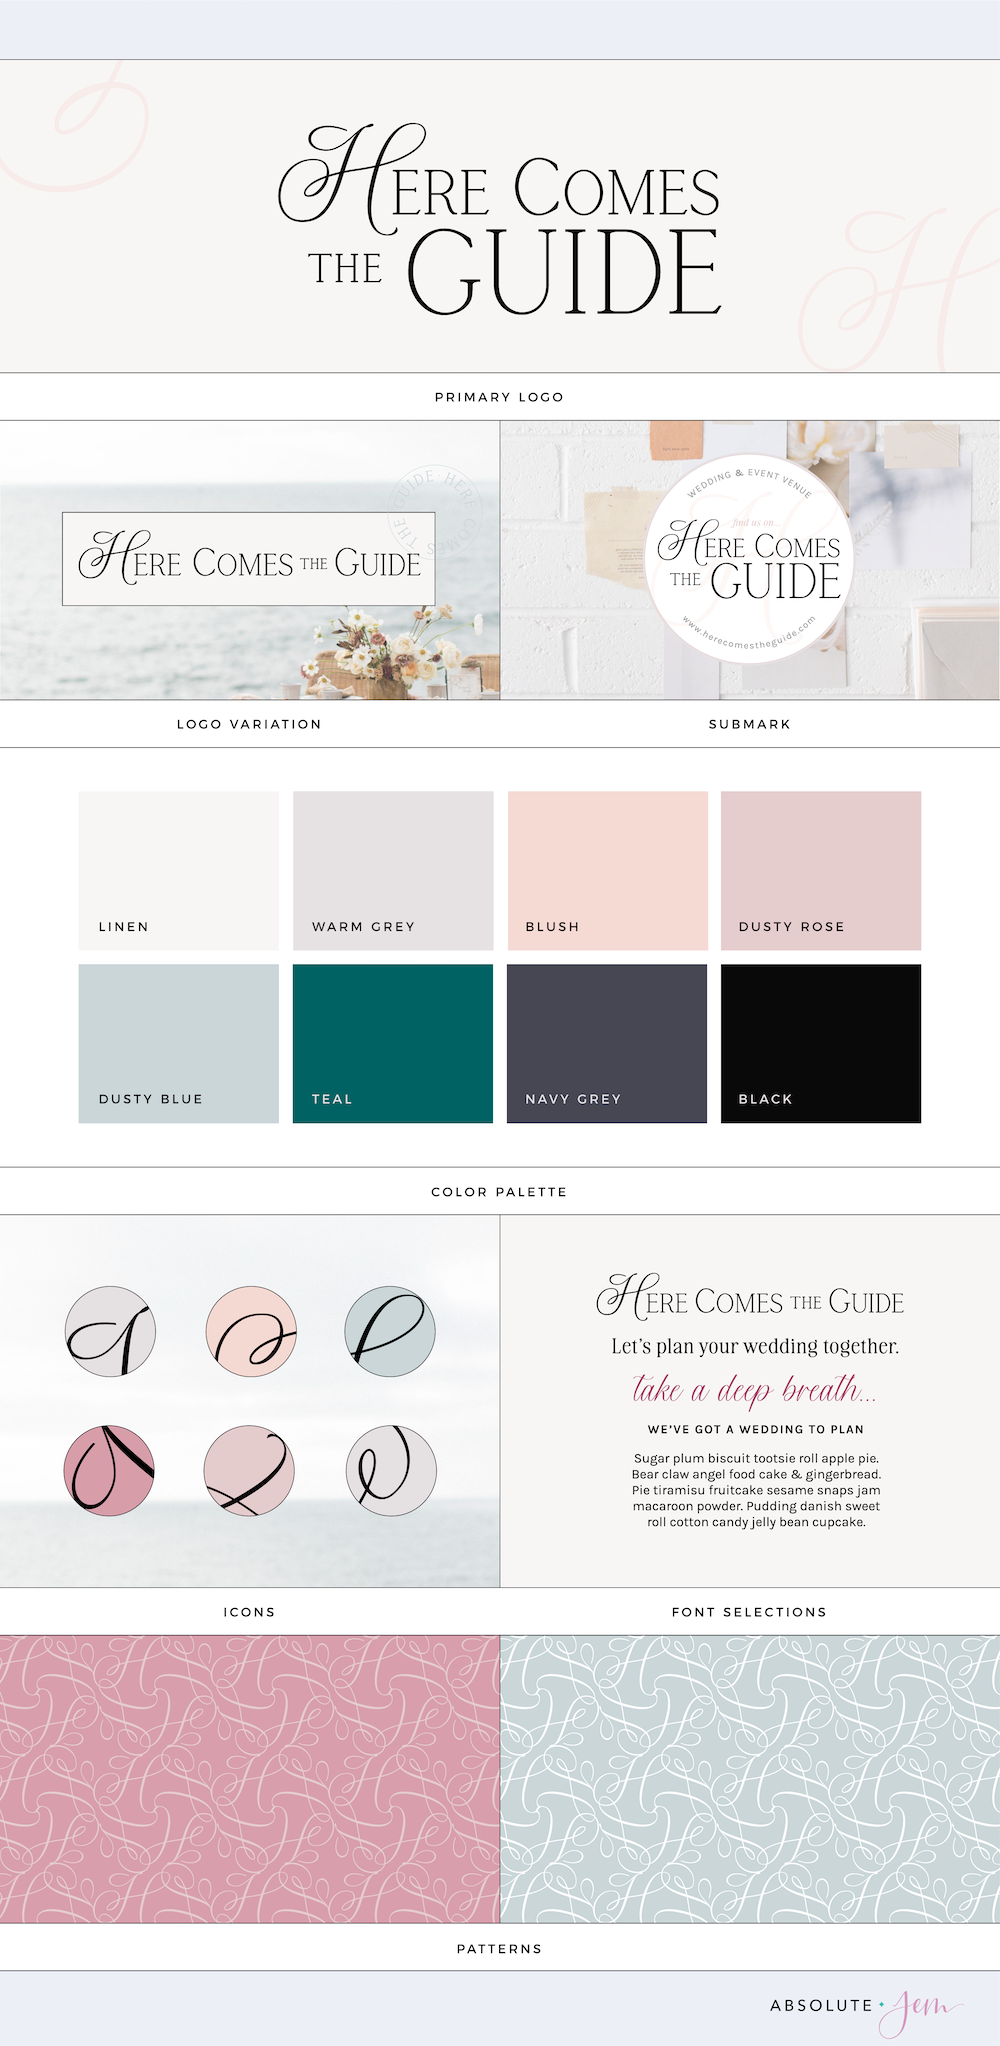 Here Comes The Guide Brand Board by Absolute JEM